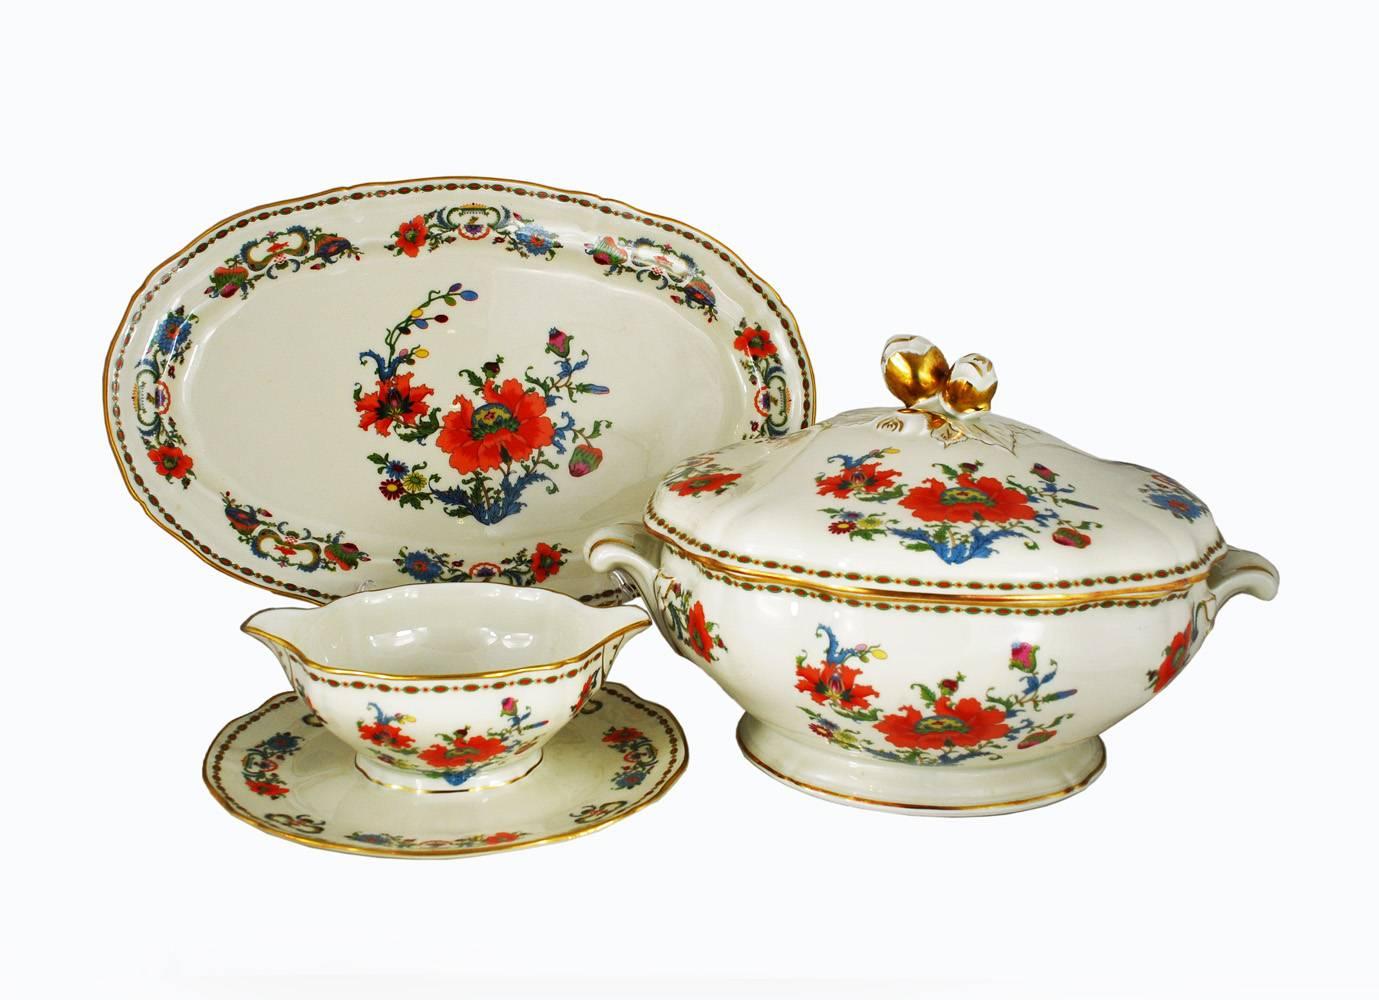 An exquisite limoges dinner service for eight featuring the vibrant Ceralene Vieux Chine pattern. This service was made by special order with cups decorated inside. Service includes eight each of dinner plates, salad plates, soup bowls, bread plates